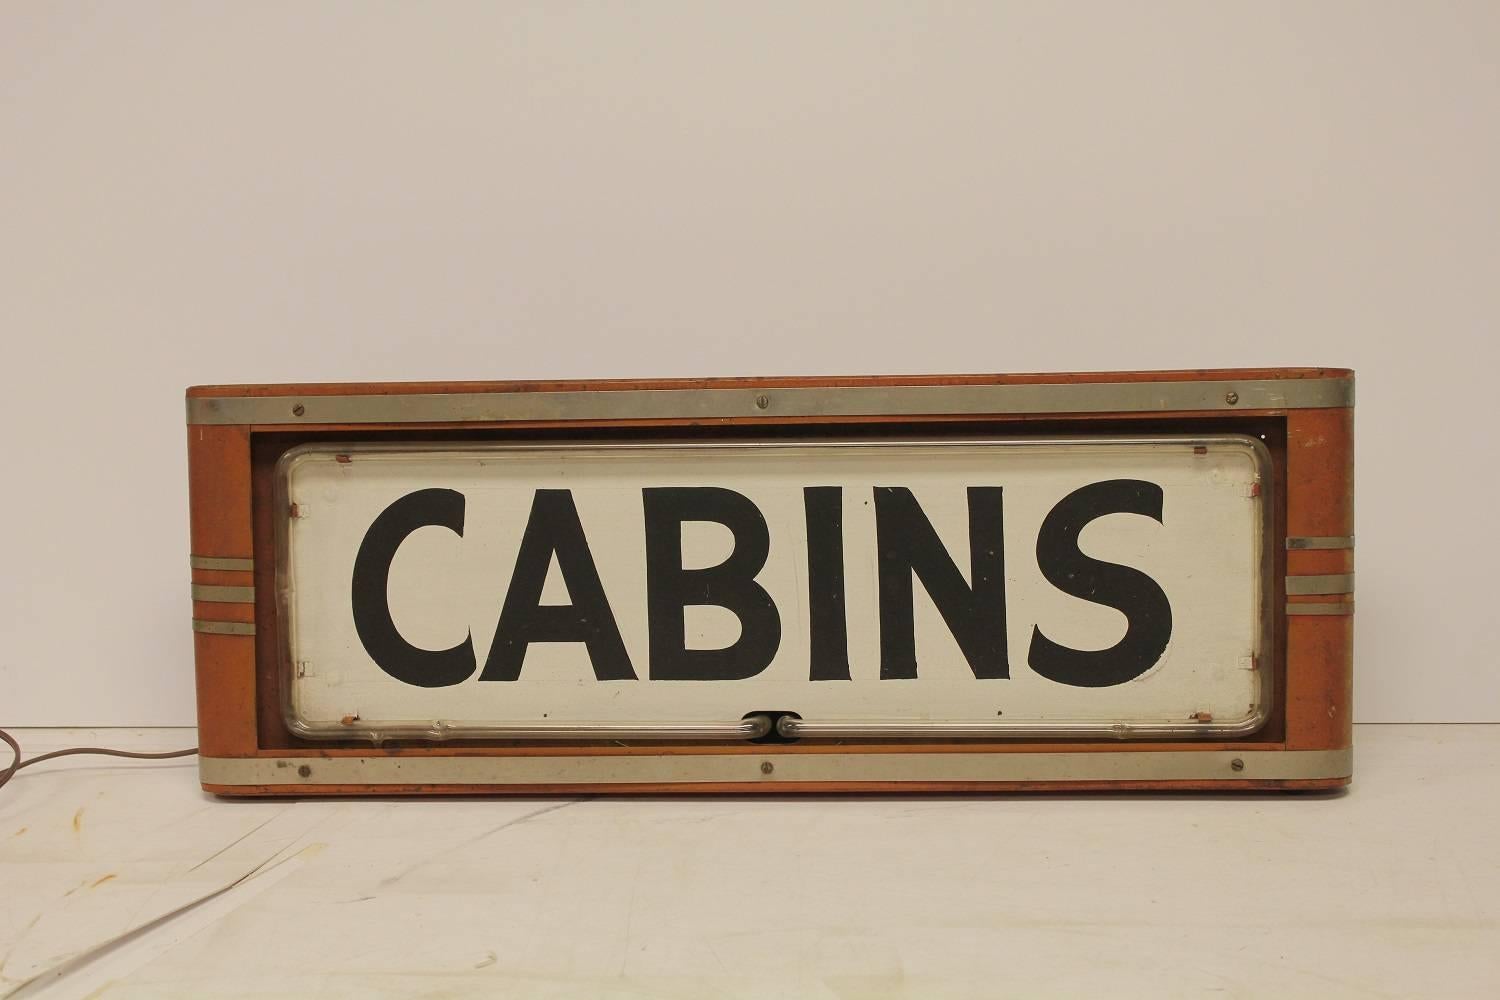 1930s neon cabins sign.